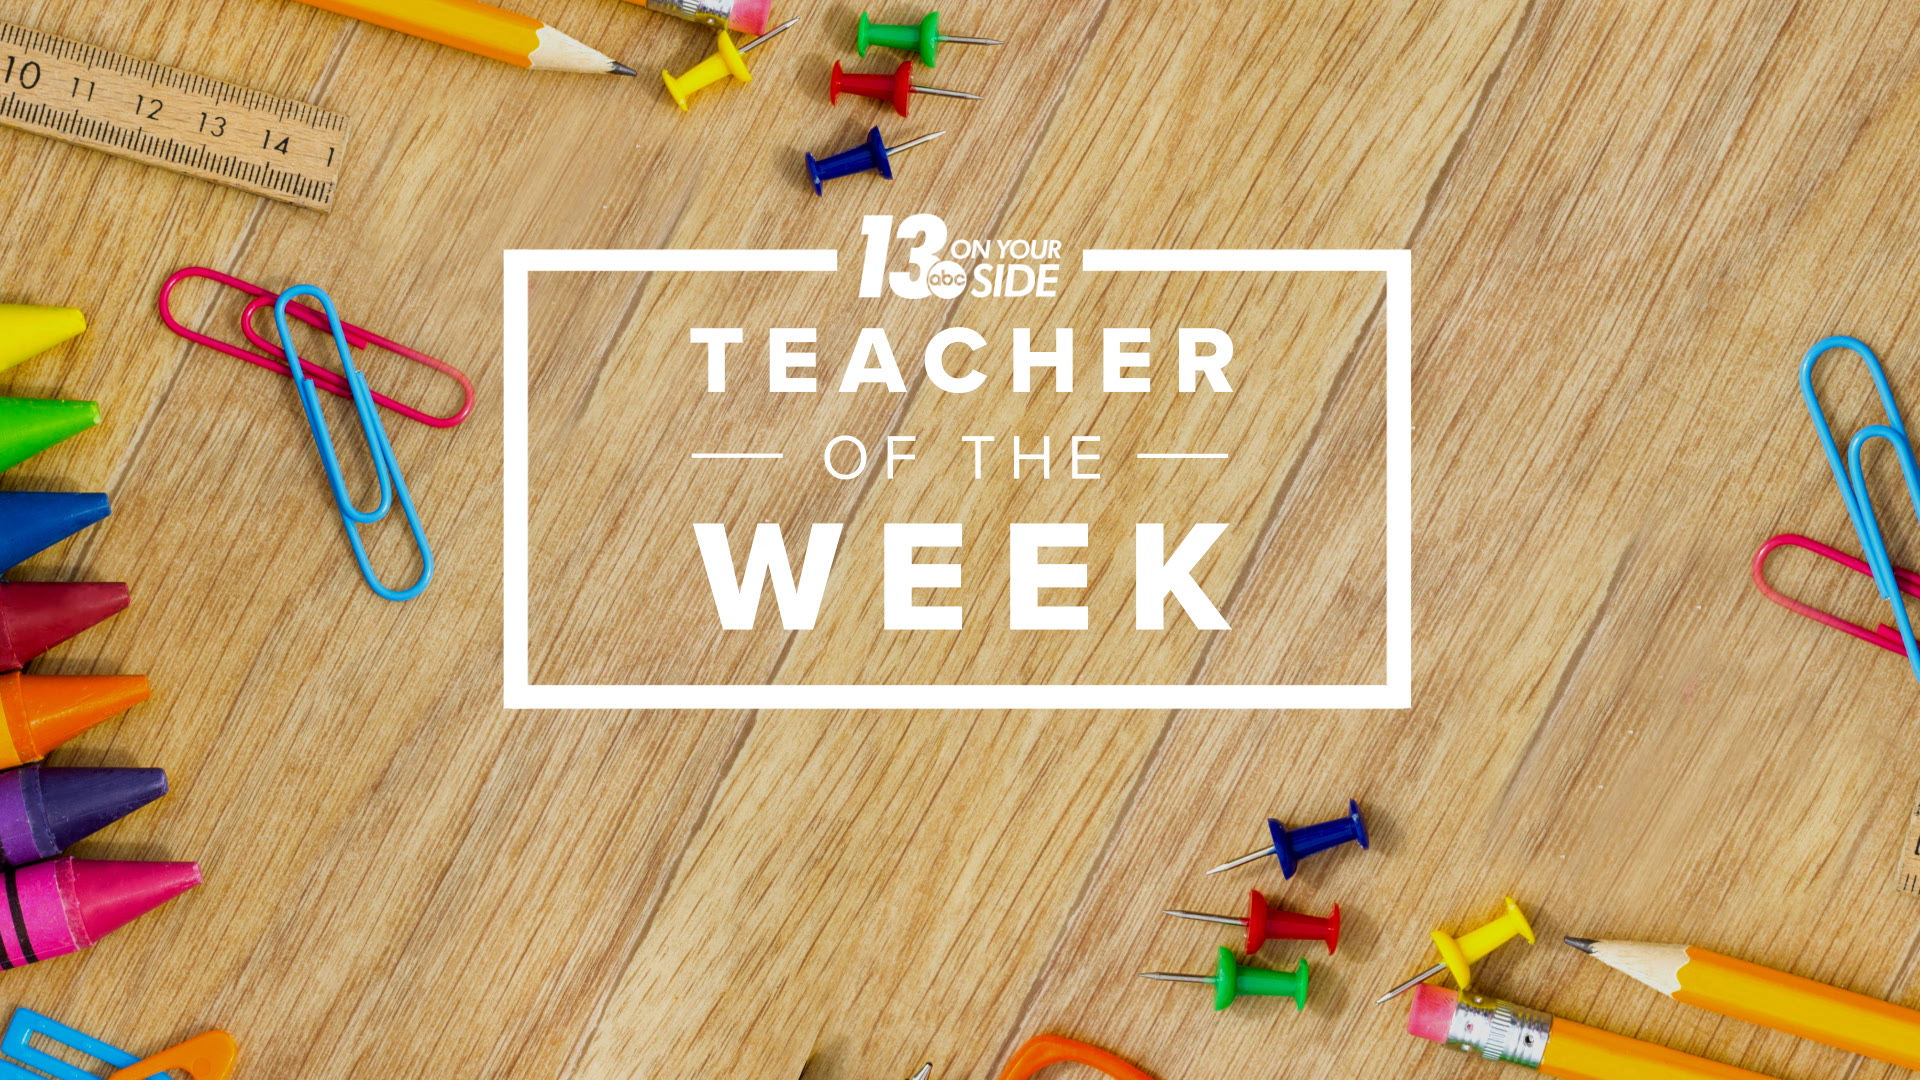 Meet all the West Michigan Teachers of the Week from the 2022-23 school year!